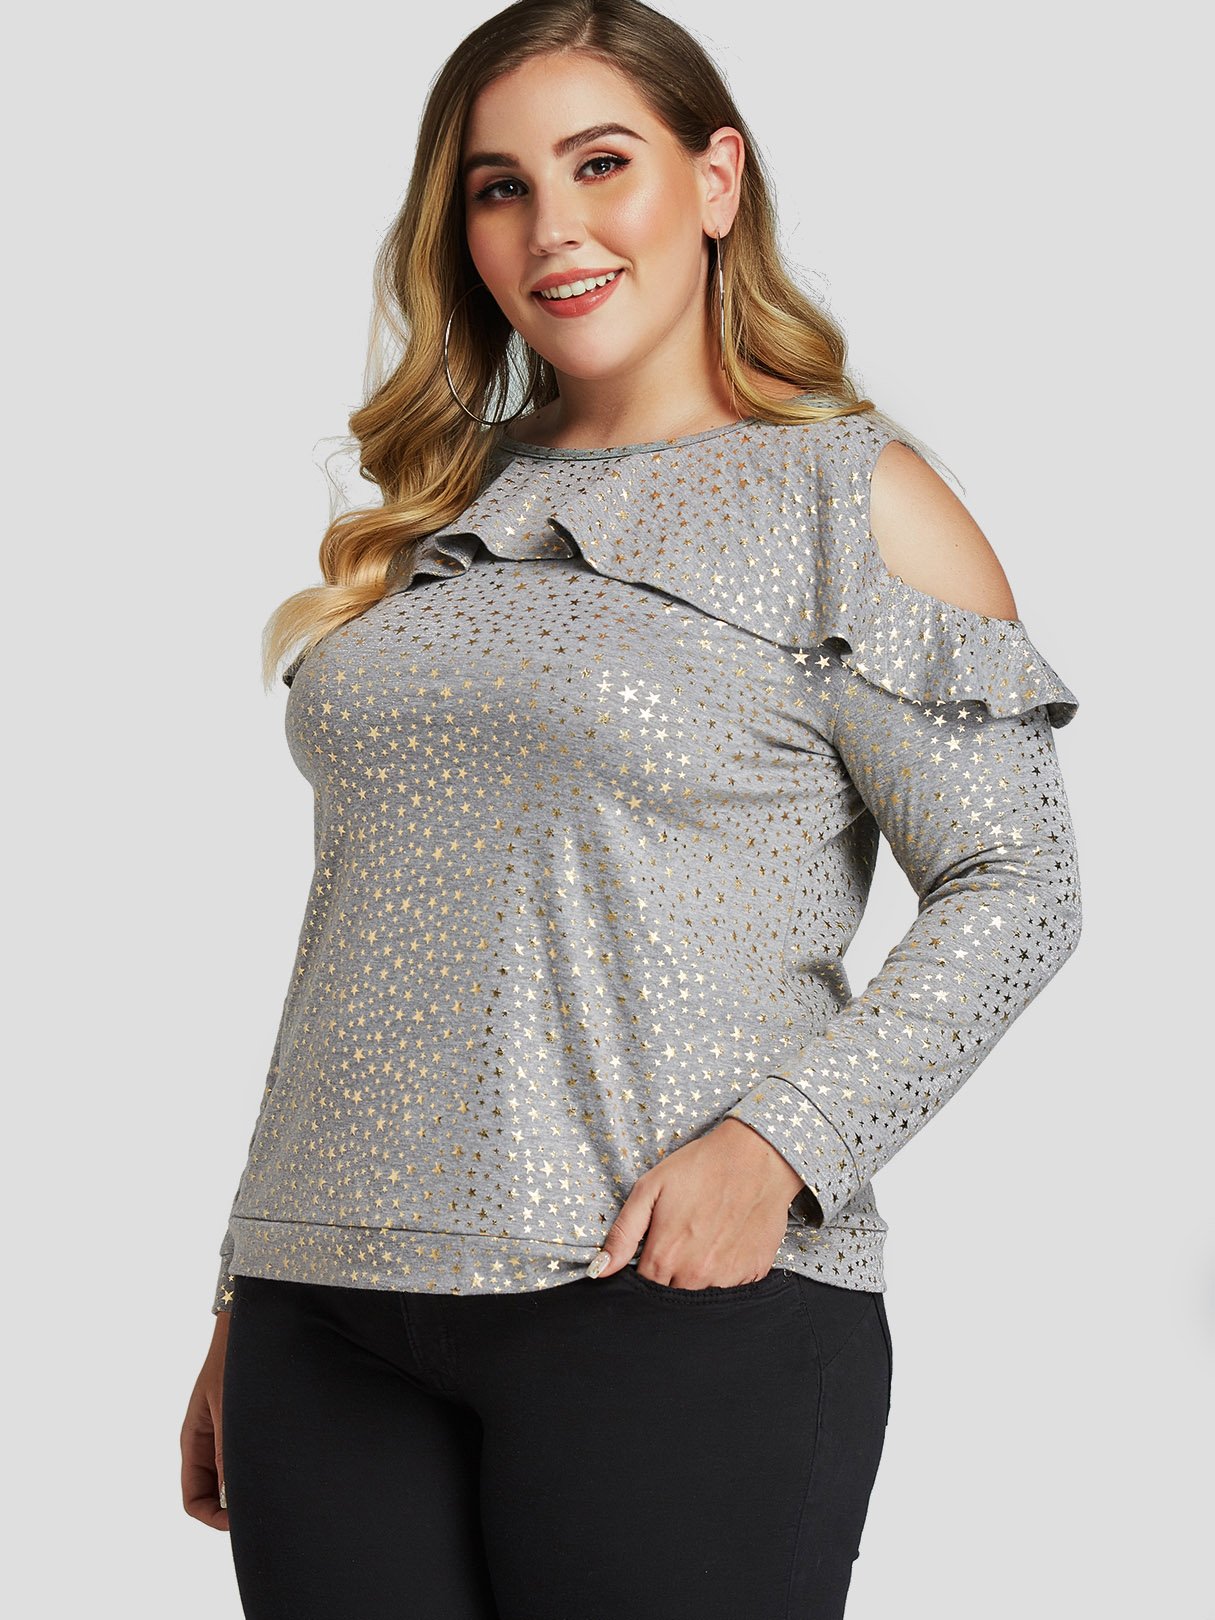 Wholesale Round Neck Star Cut Out Long Sleeve Grey Plus Size Tops